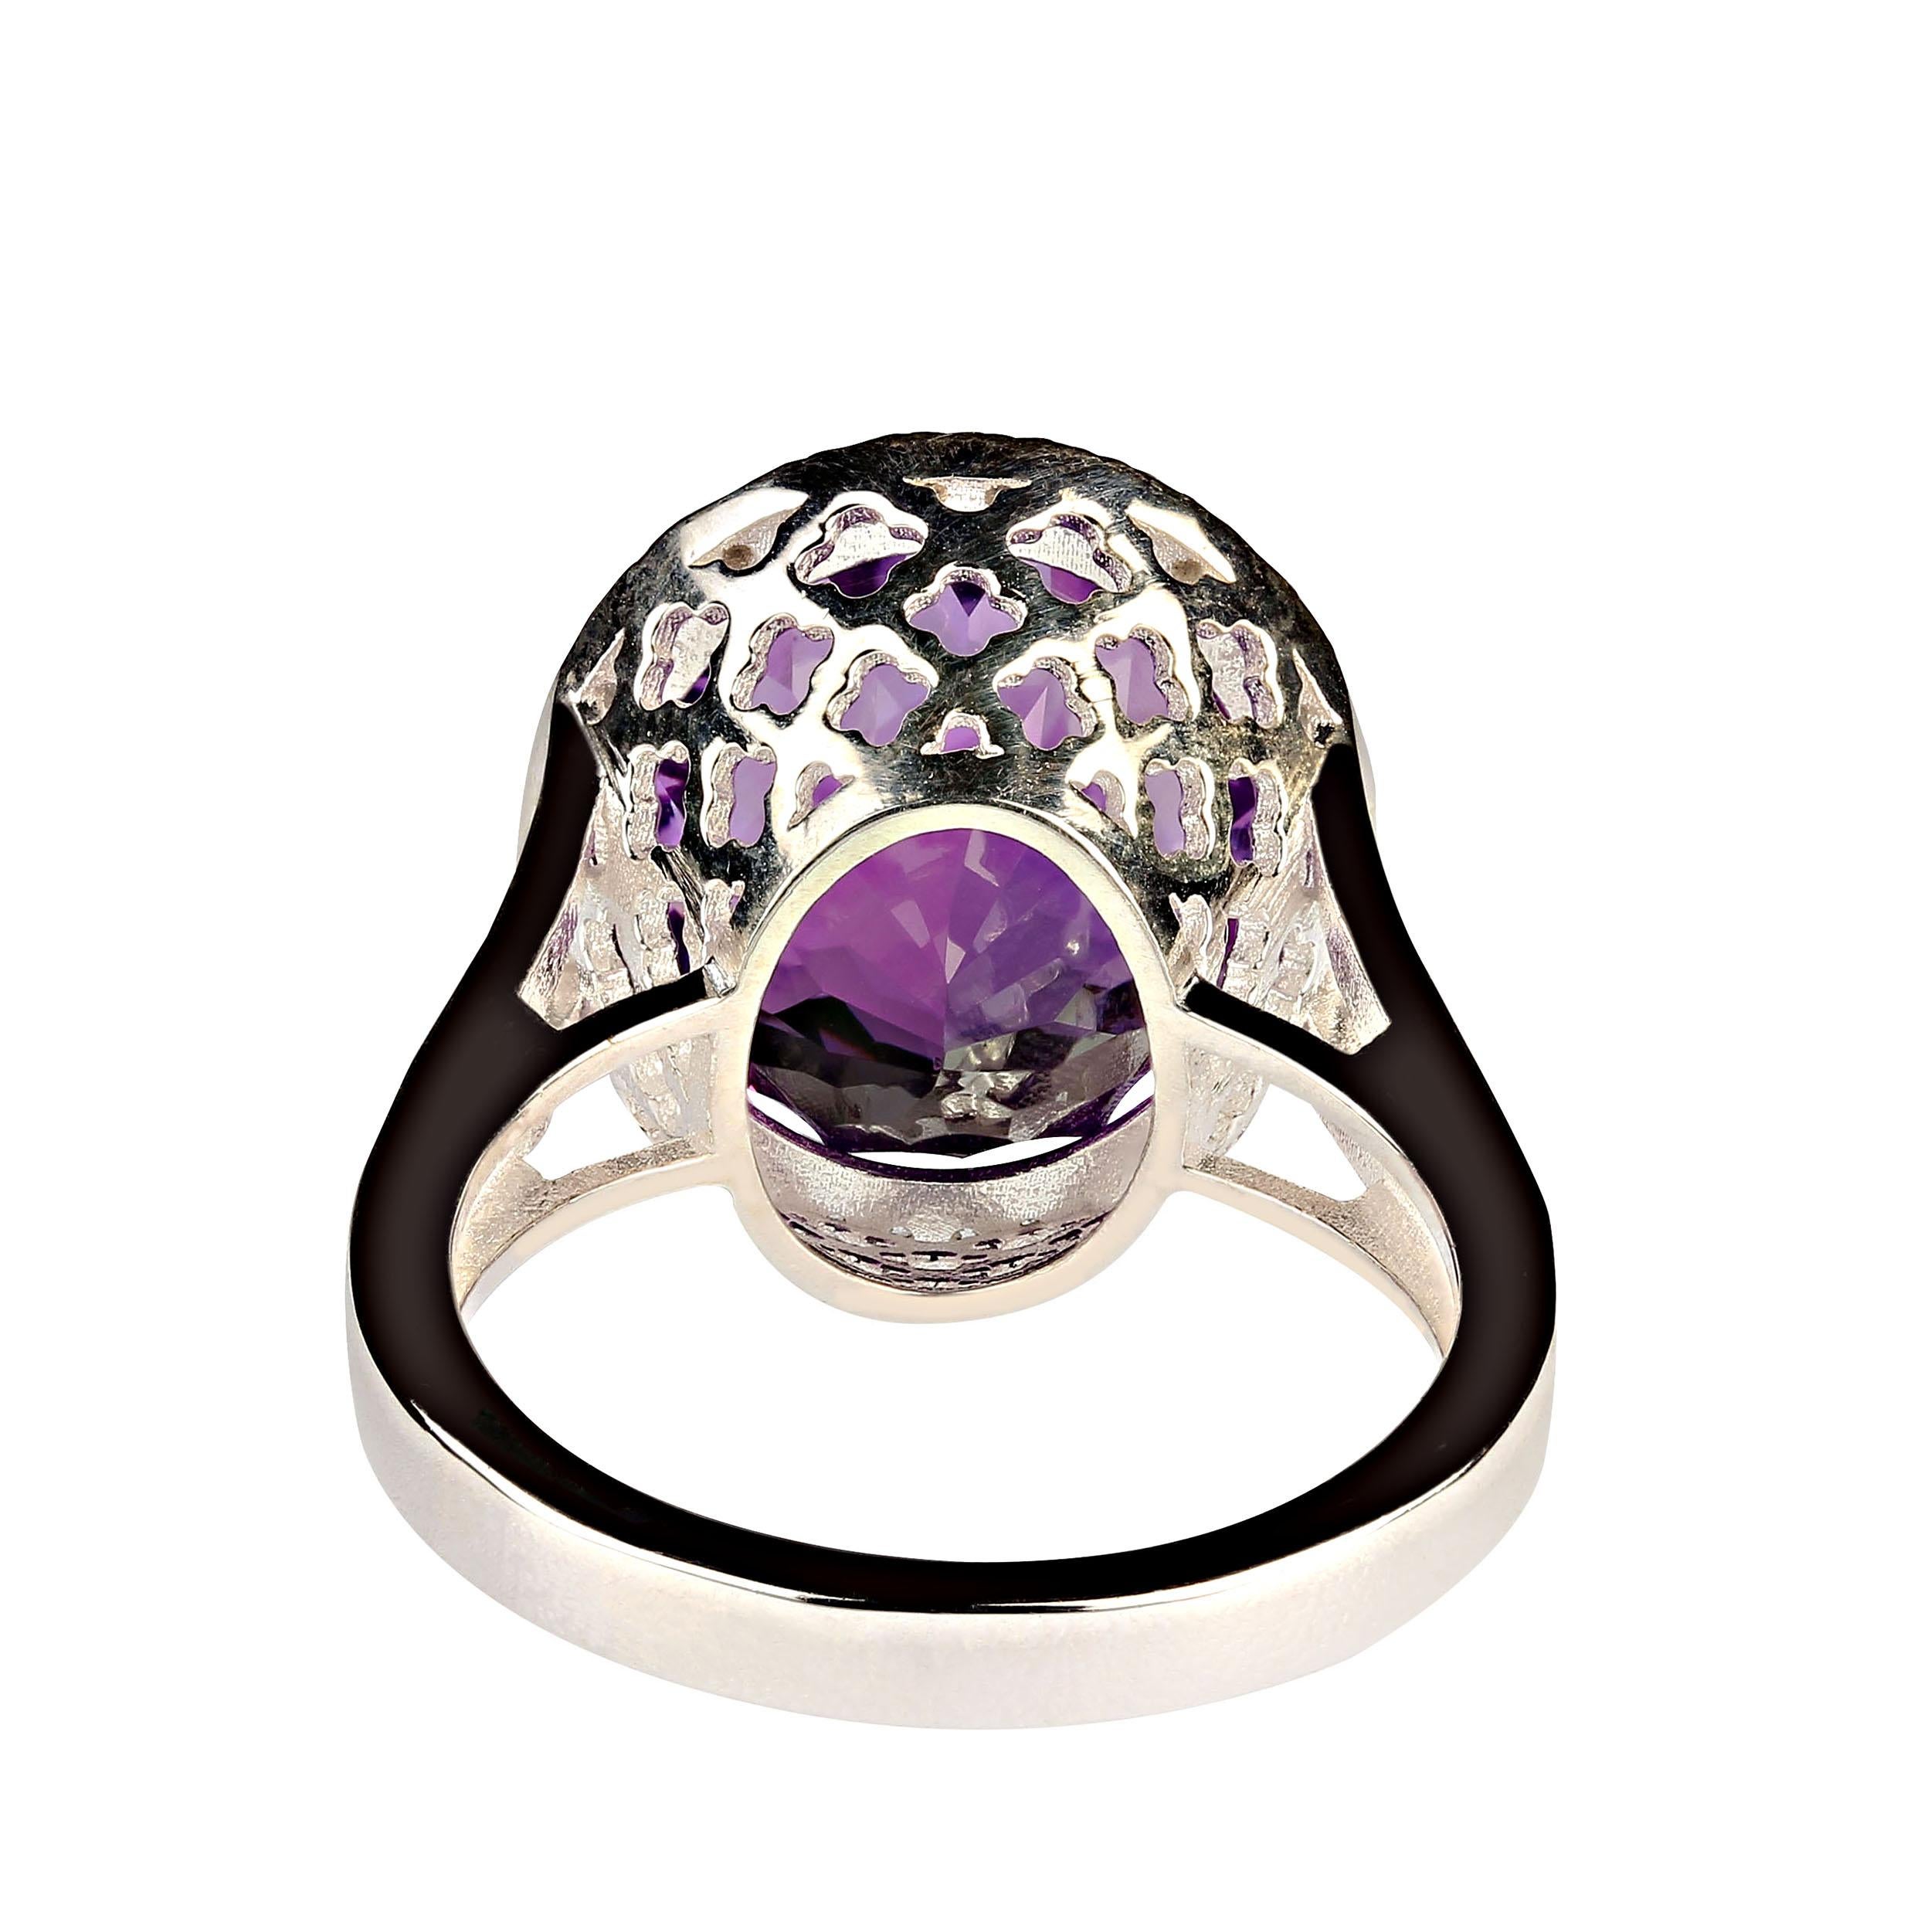 Oval Cut AJD Elegant Cocktail Ring of Amethyst and Sparkling Zircons February Birthstone! For Sale